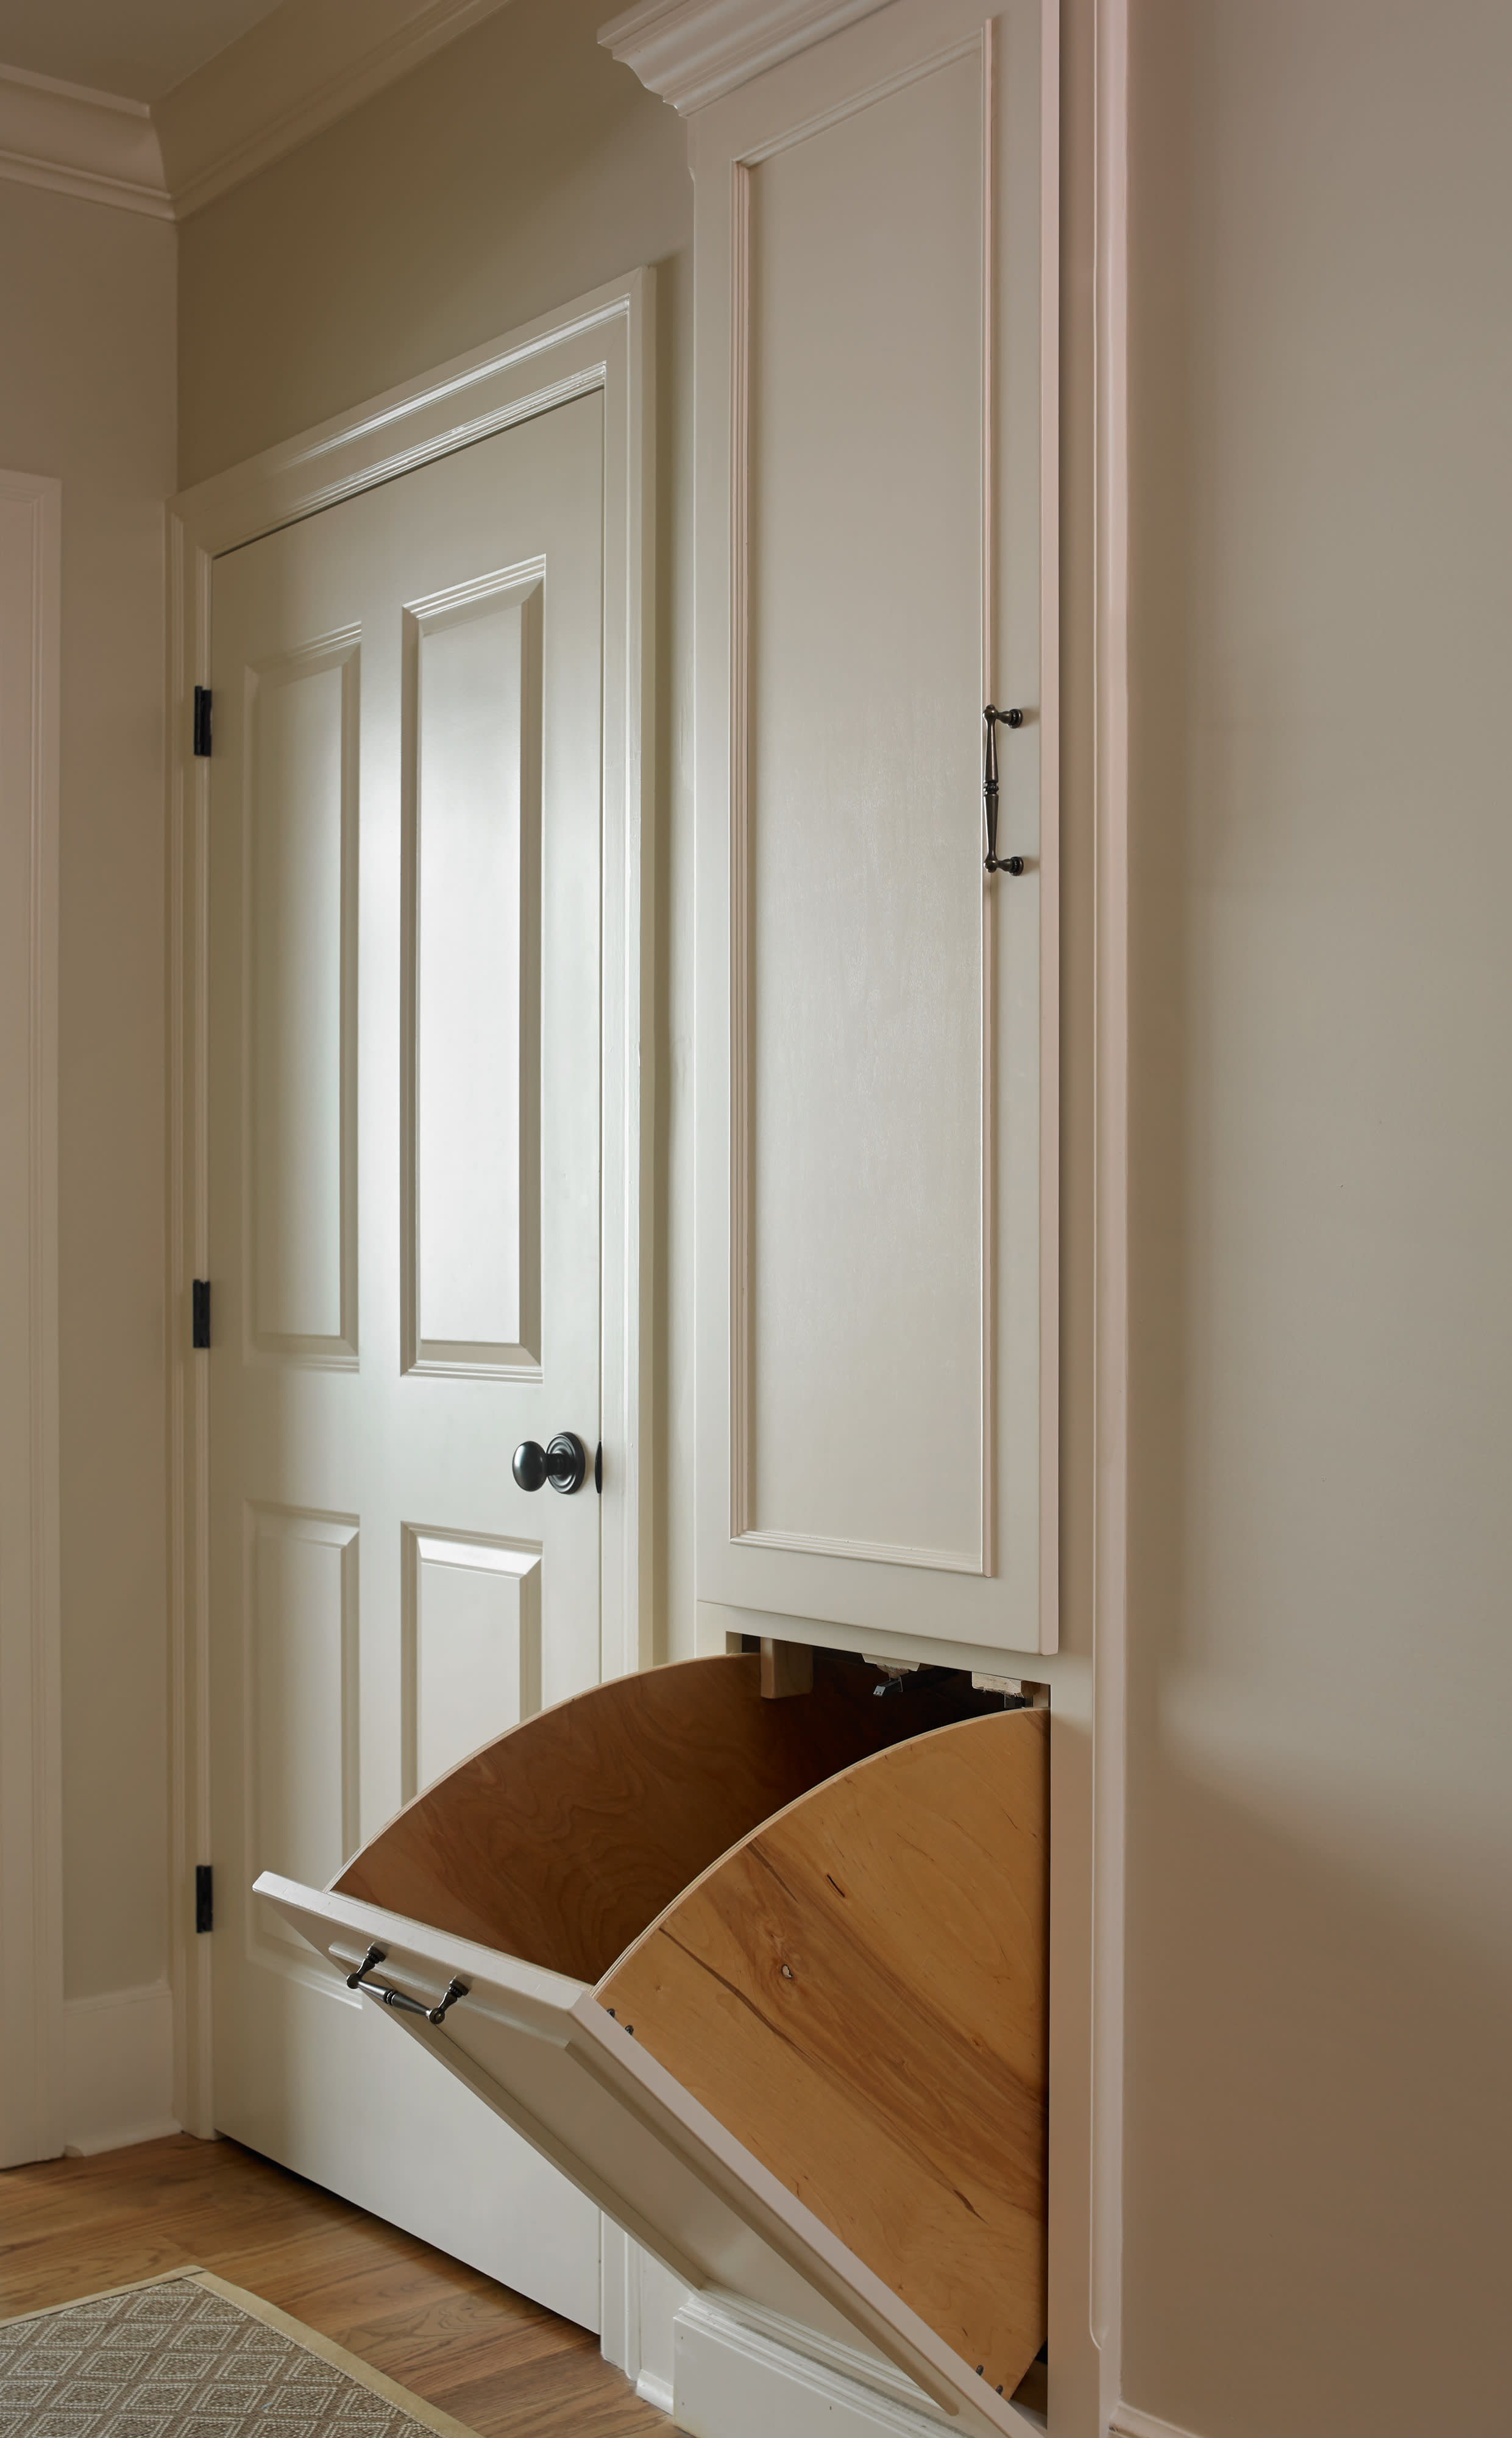 Laundry Chute Design Ideas for Residential 